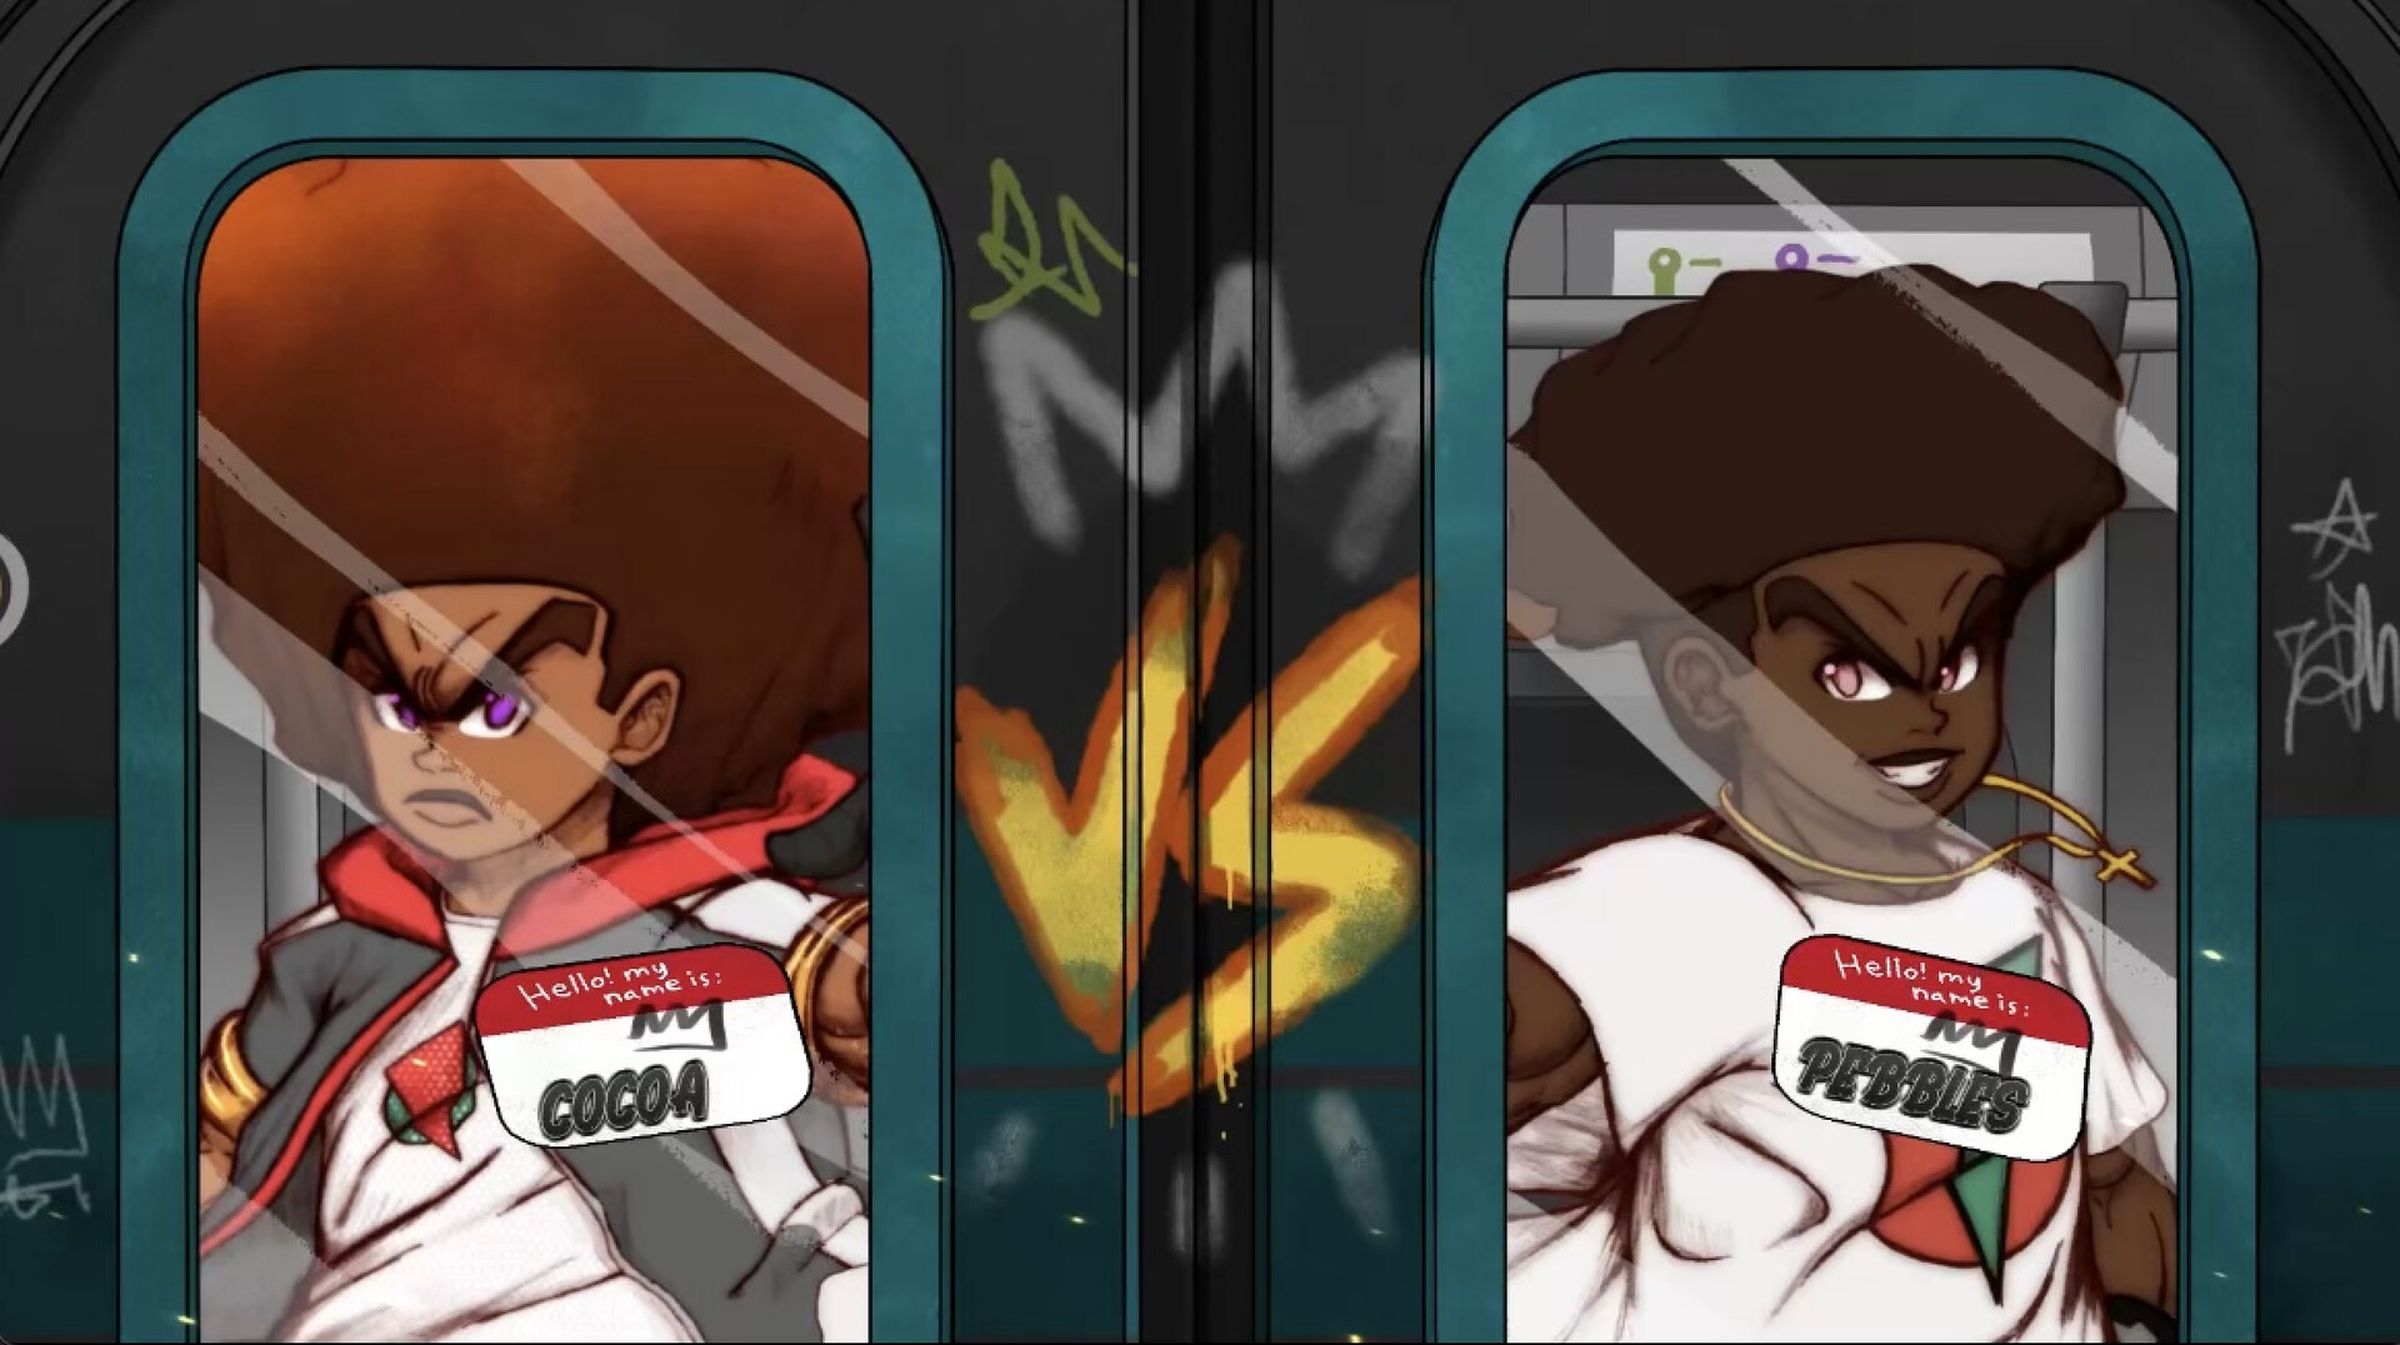 Screenshot from 5 Force Fighters featuring the match up screen between brothers Cocoa and Pebbles